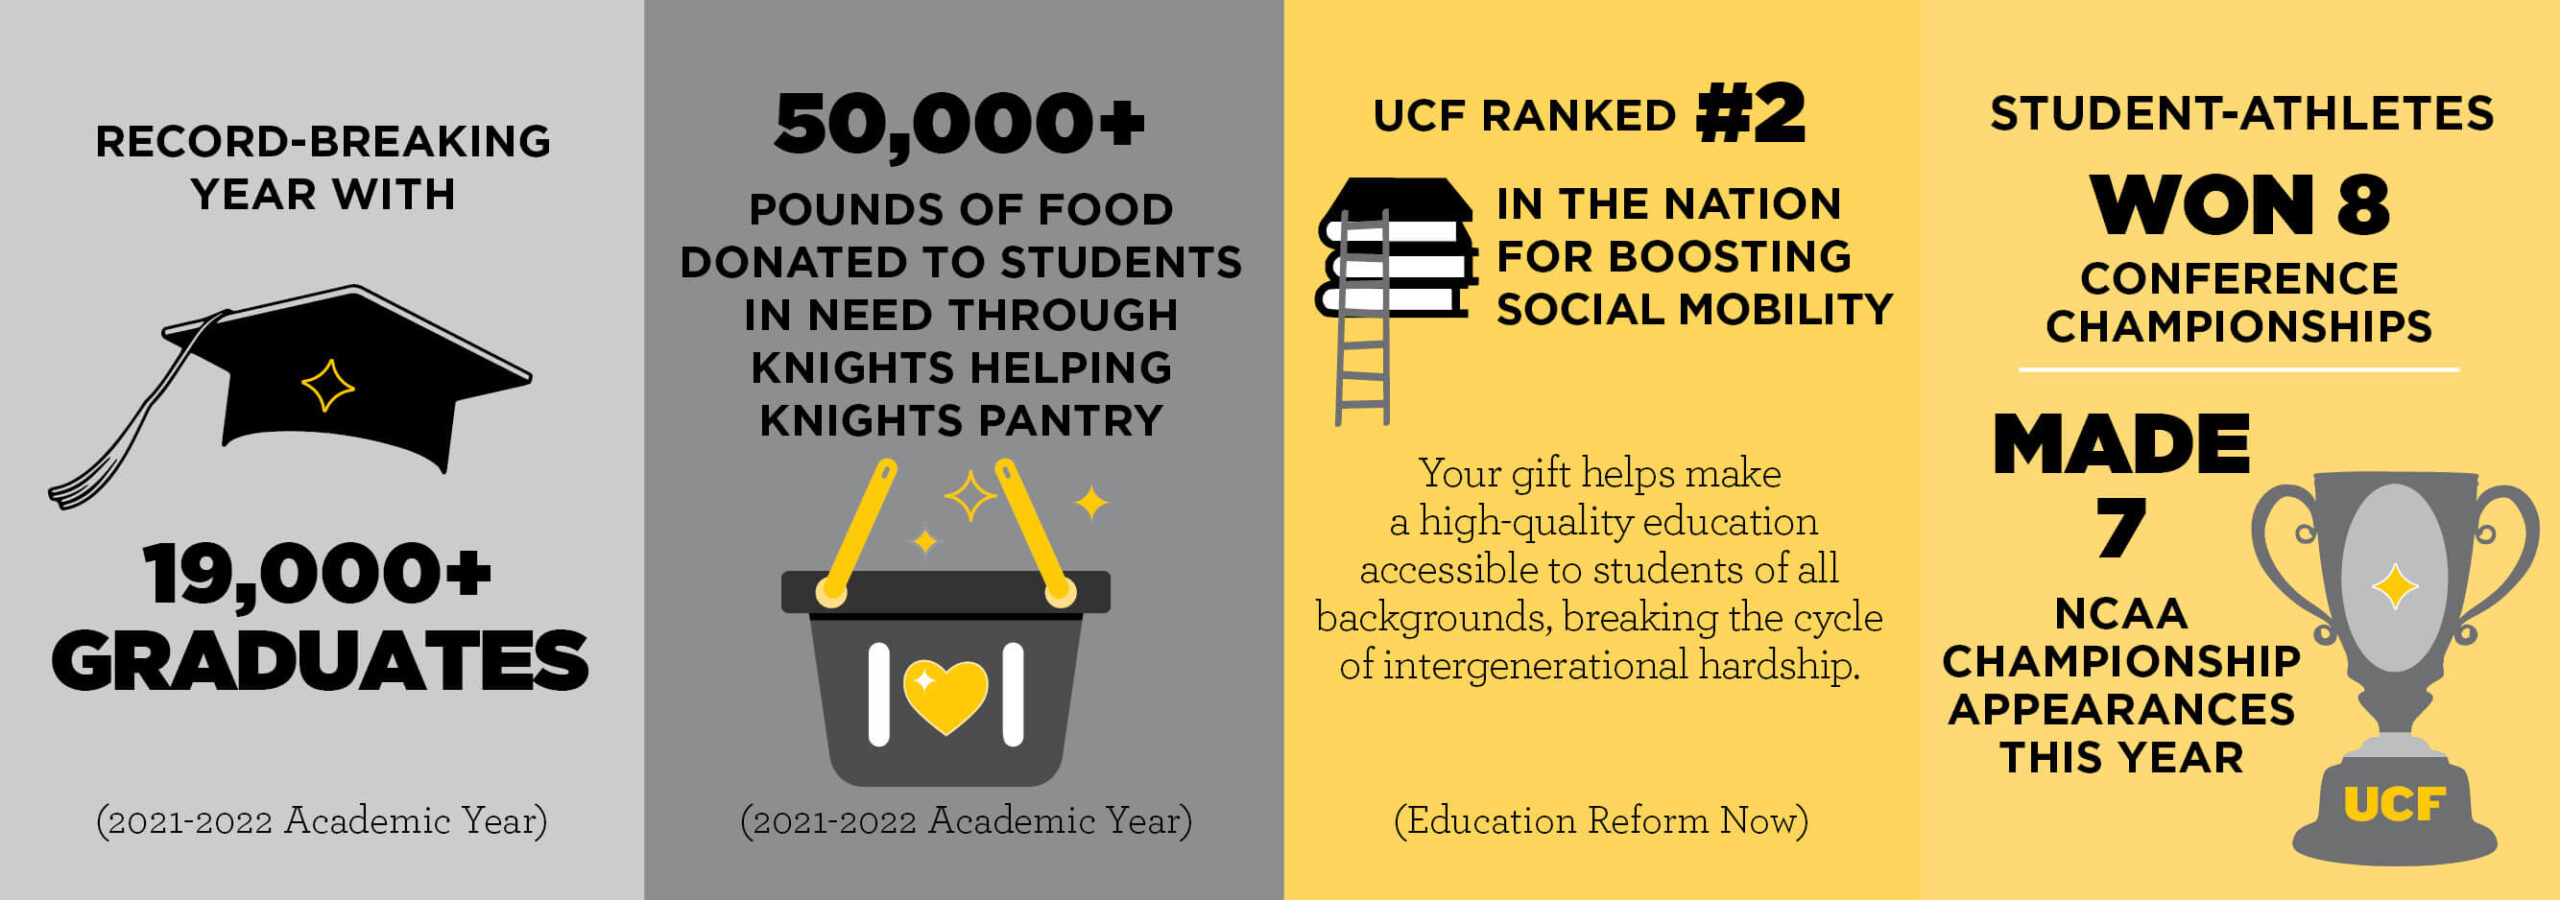 Infographic with UCF statistics